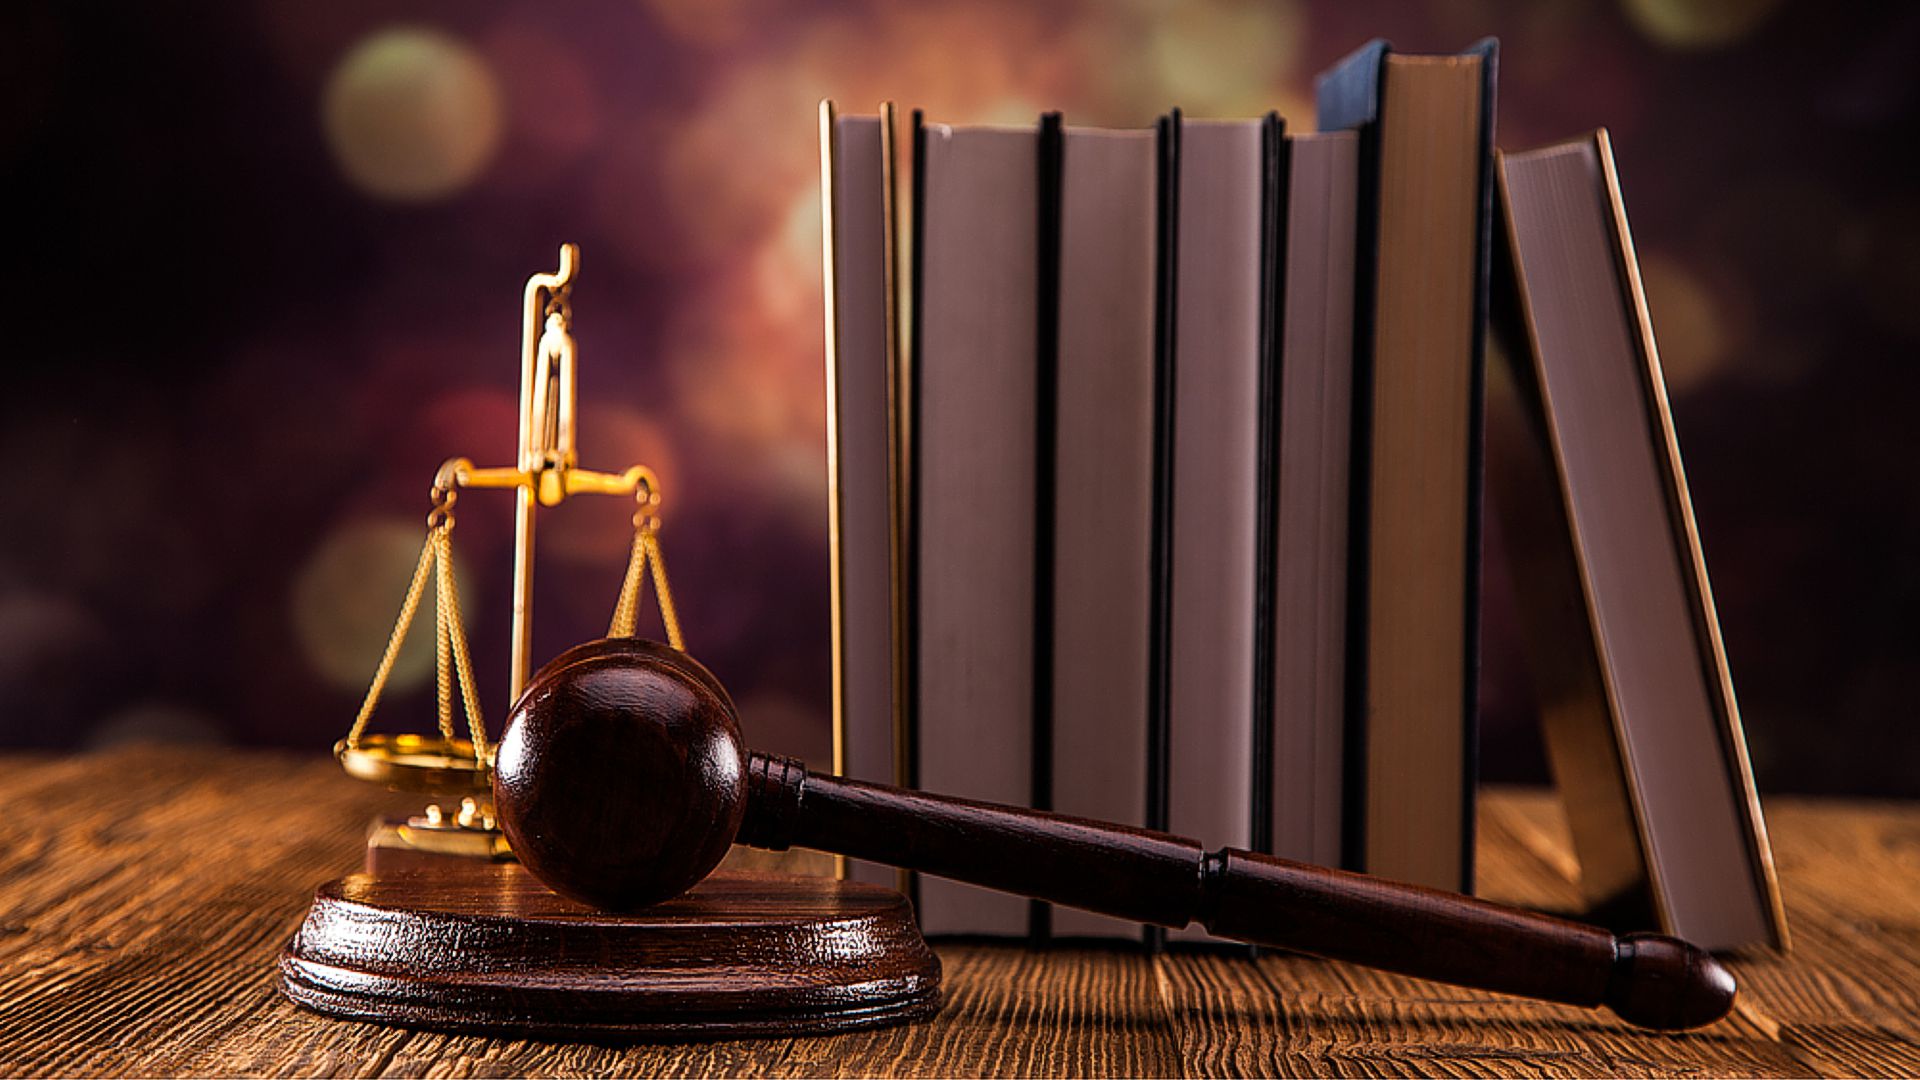 books and scales, gavel, lawyer desktop wallpapers free download